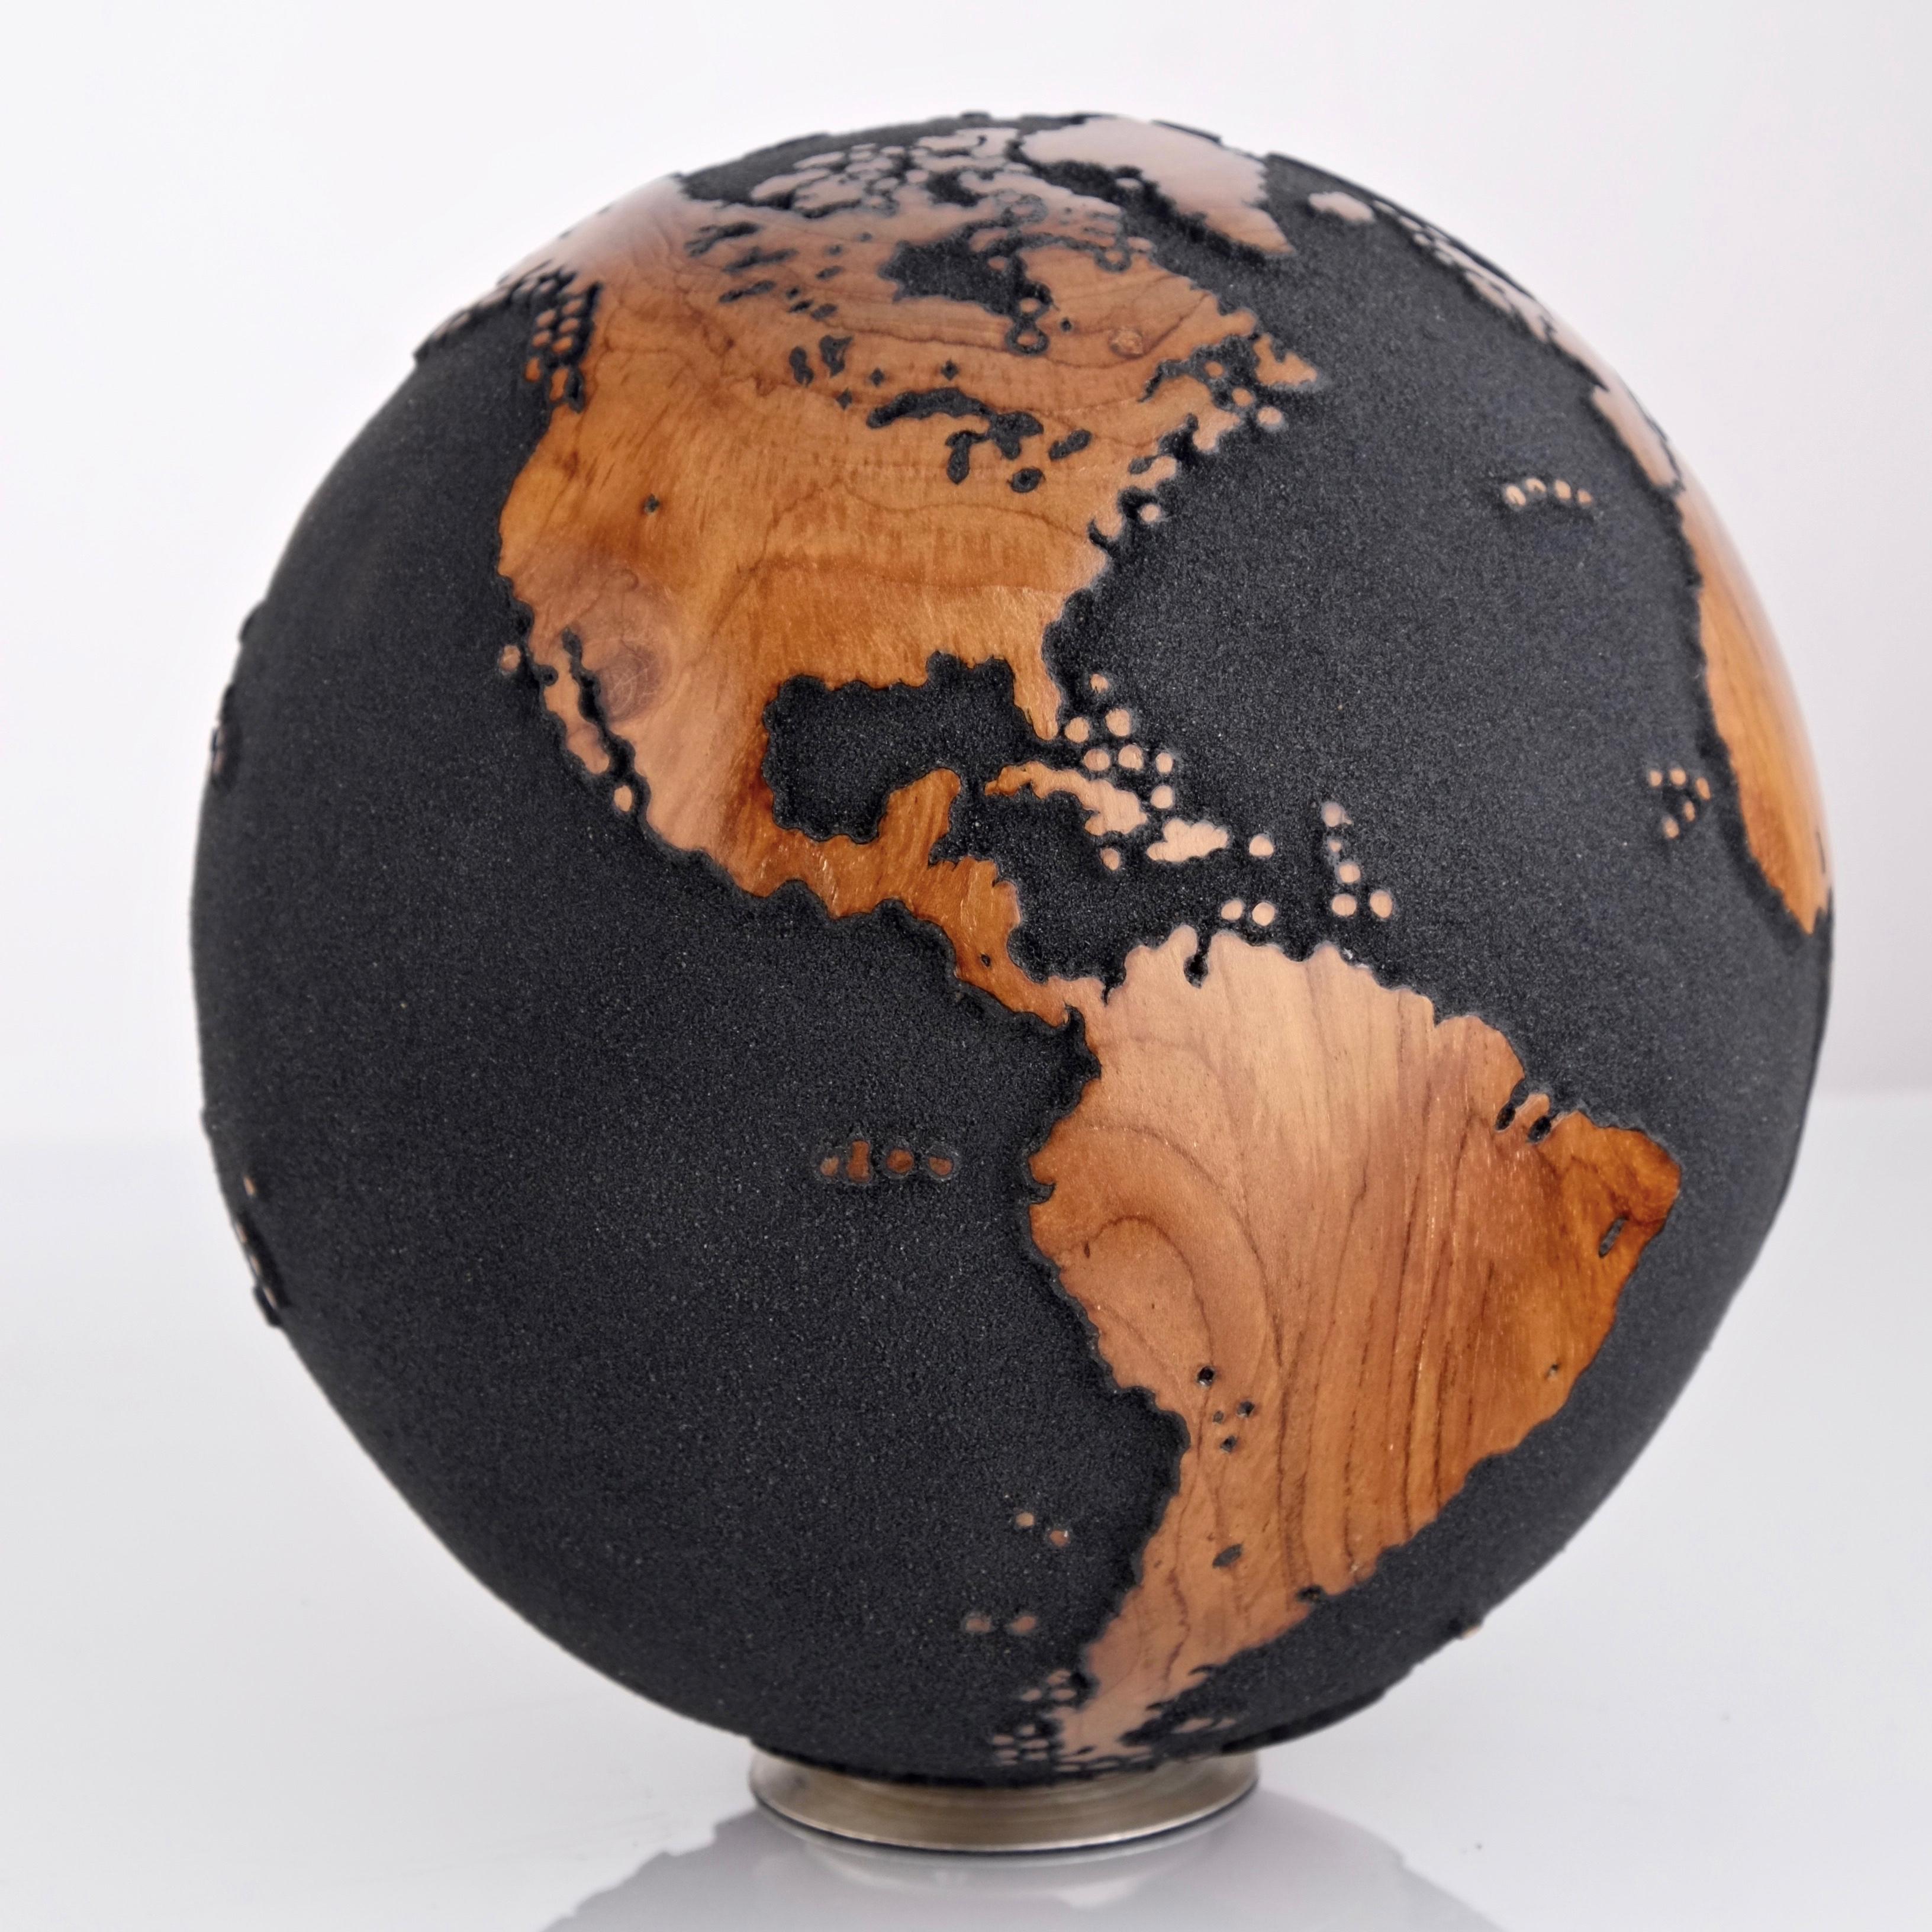 Teakwood and black lava sand make this beautiful turning globe a real stunning sculpture.
Made from a whole piece of wood the way the sculpture is shaped is defined by how the tree grew.
Sitting on a turning base the sculpture can spin silently